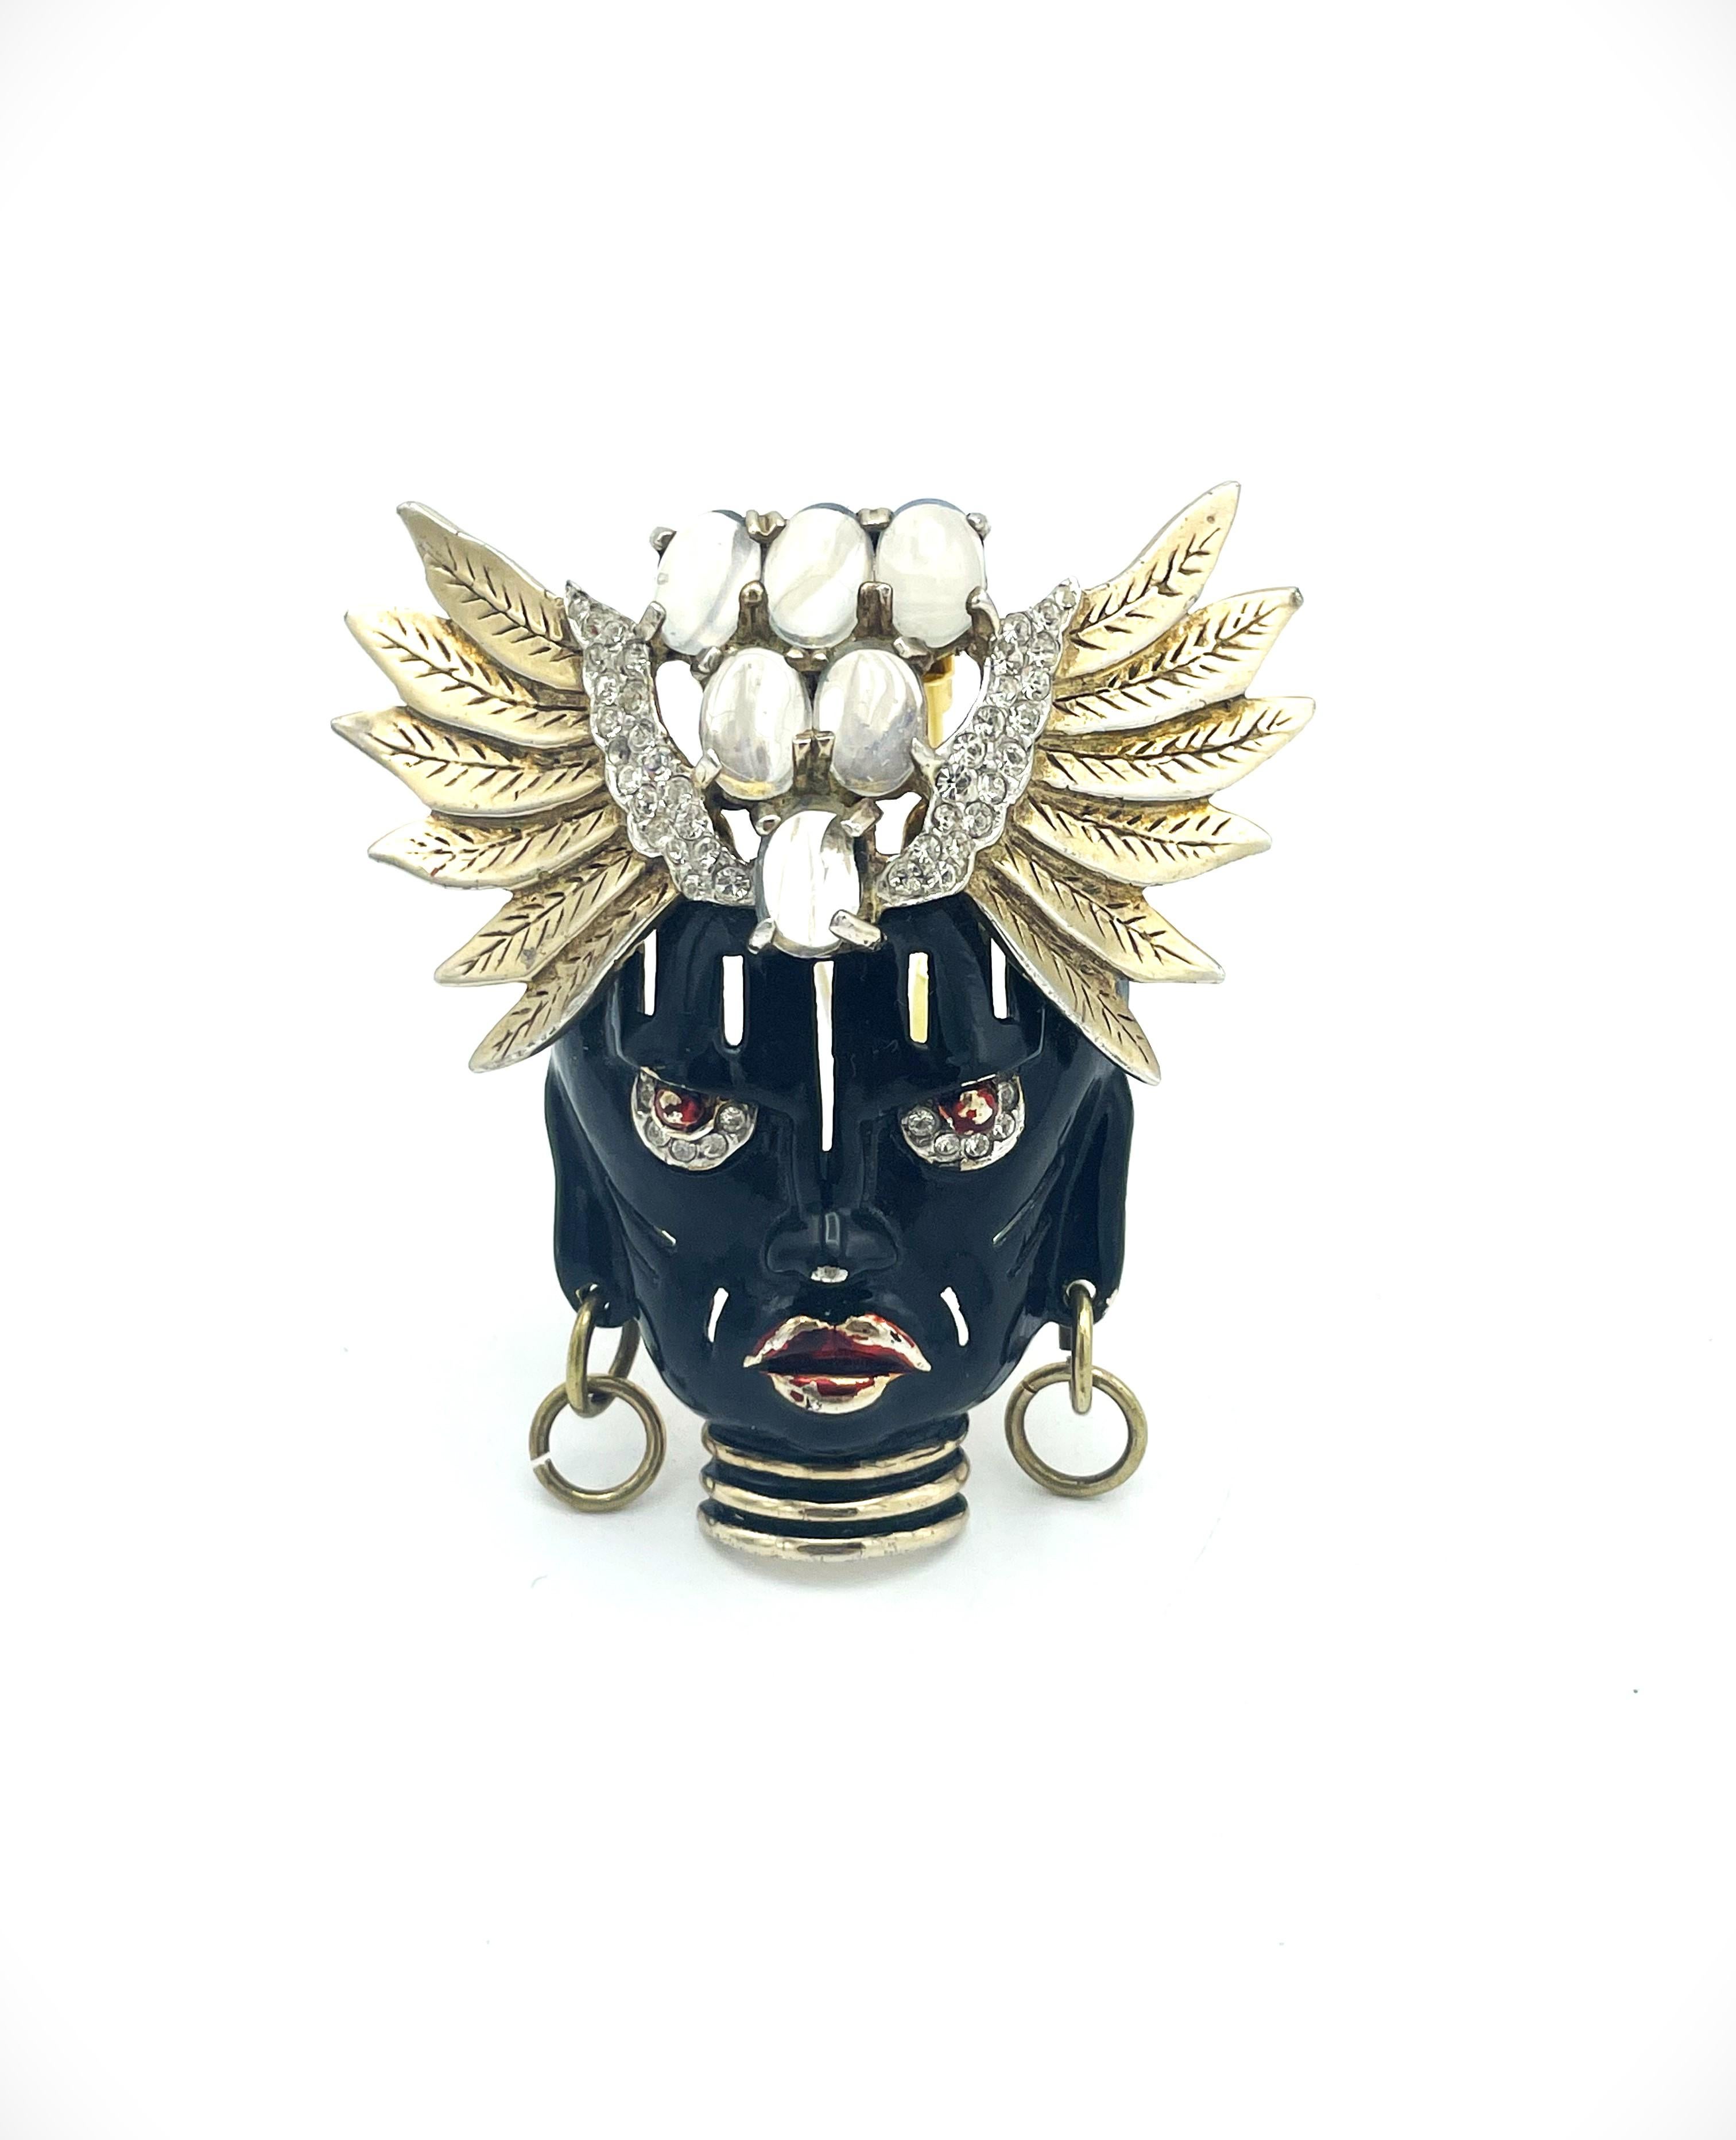 About
Exquisit 1945 Solomon Finkelstein for Reja 'Ubangi' pin from the 'Africana' collection. The wonderful dimensional mesmerihzing face features glossy black fenamel and a meztallic red mouth and piertcing eyes. Clear rhinestones under the eyes.